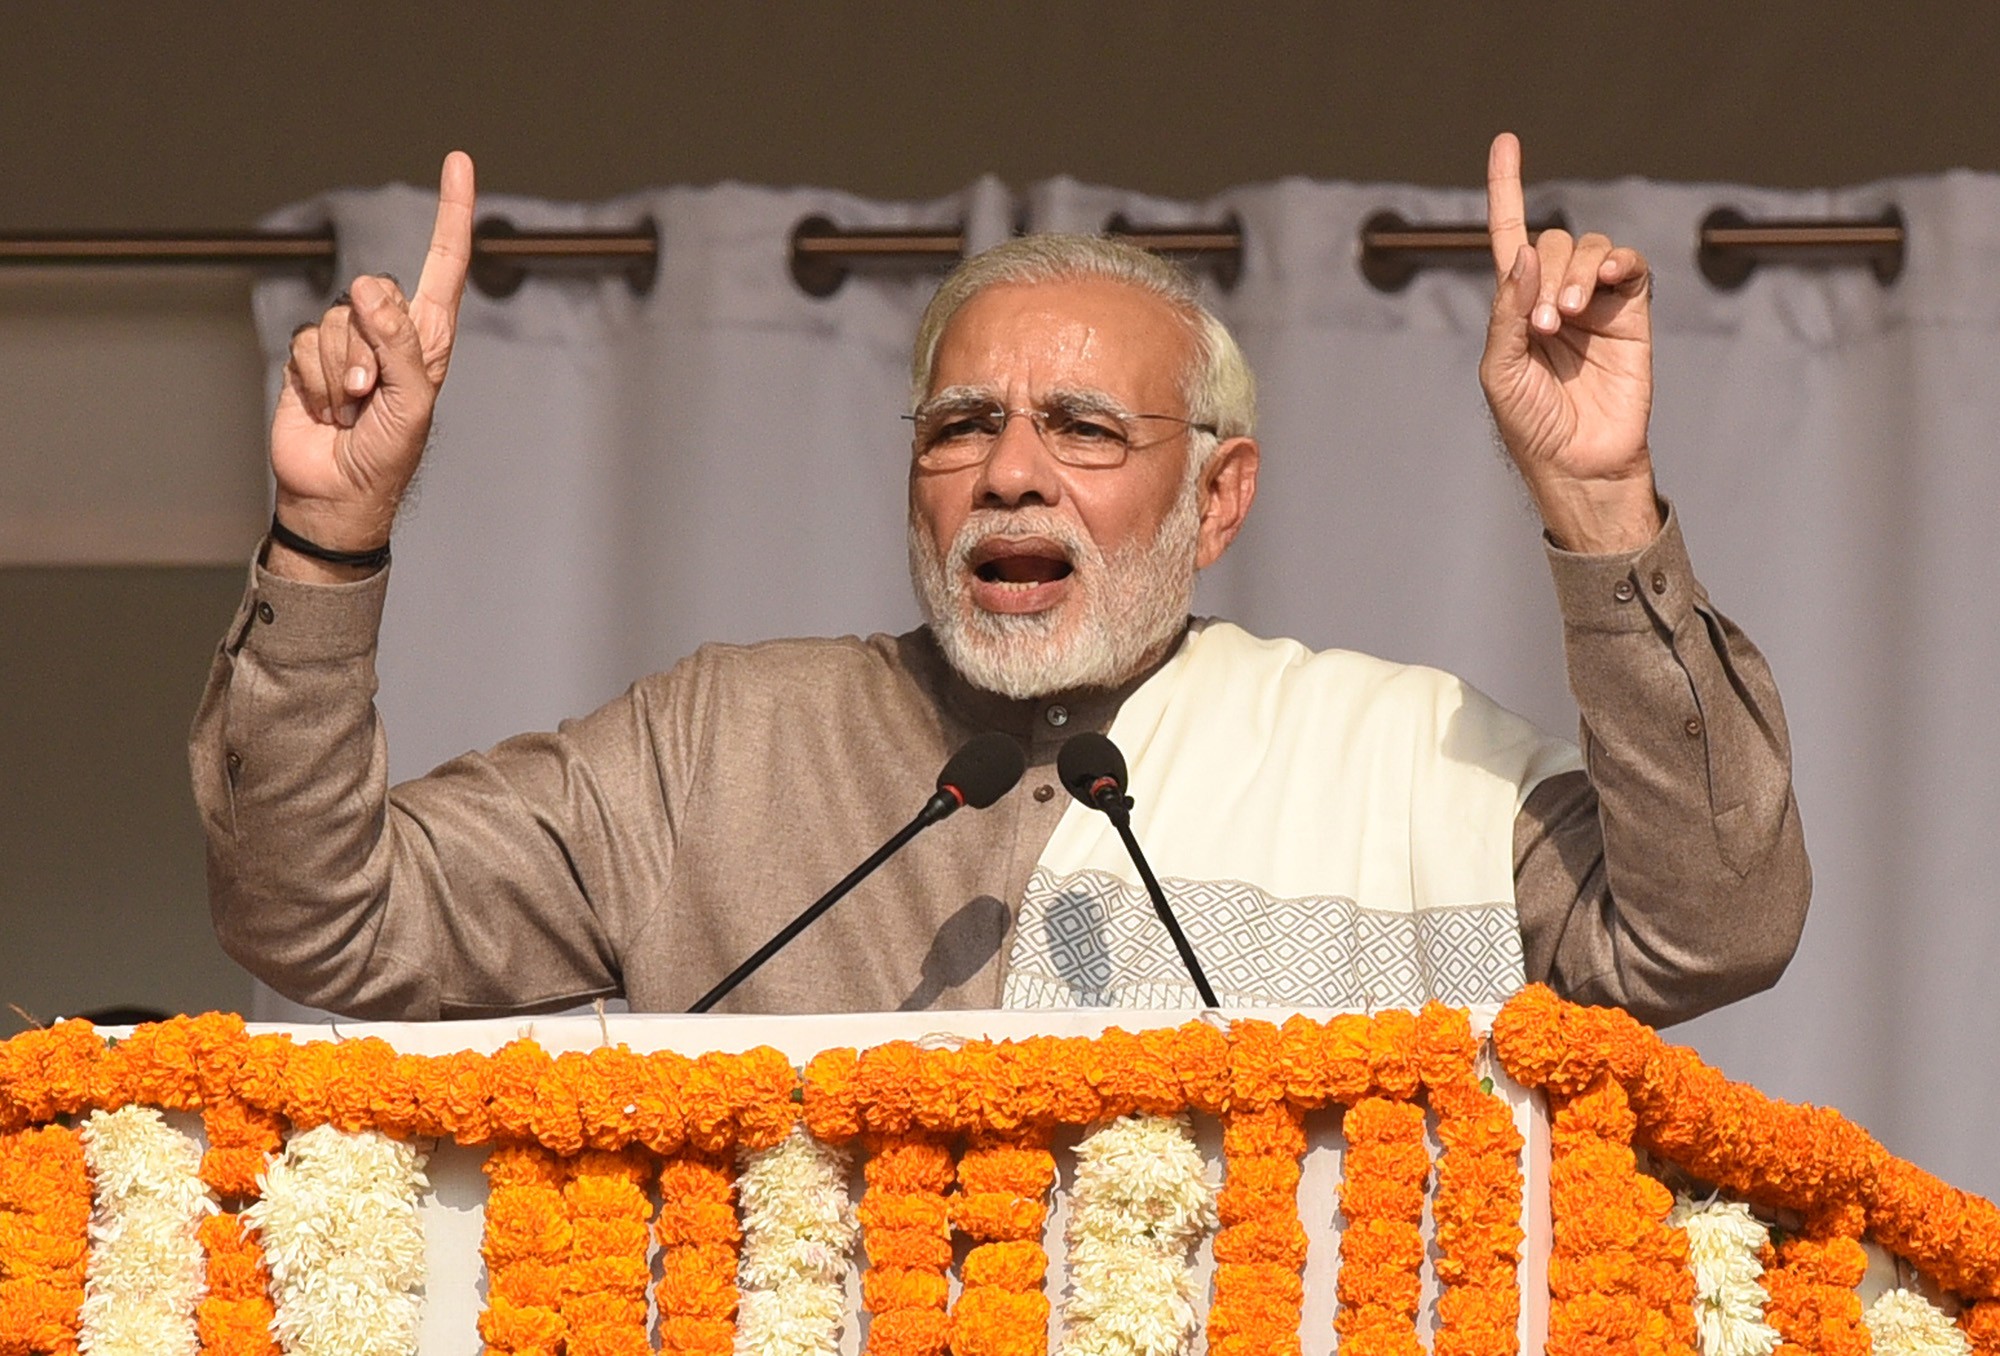 Indian Prime Minister Narendra Modi has dubbed himself the “chowkidar” or “watchman” of the nation. Photo: Hindustan Times